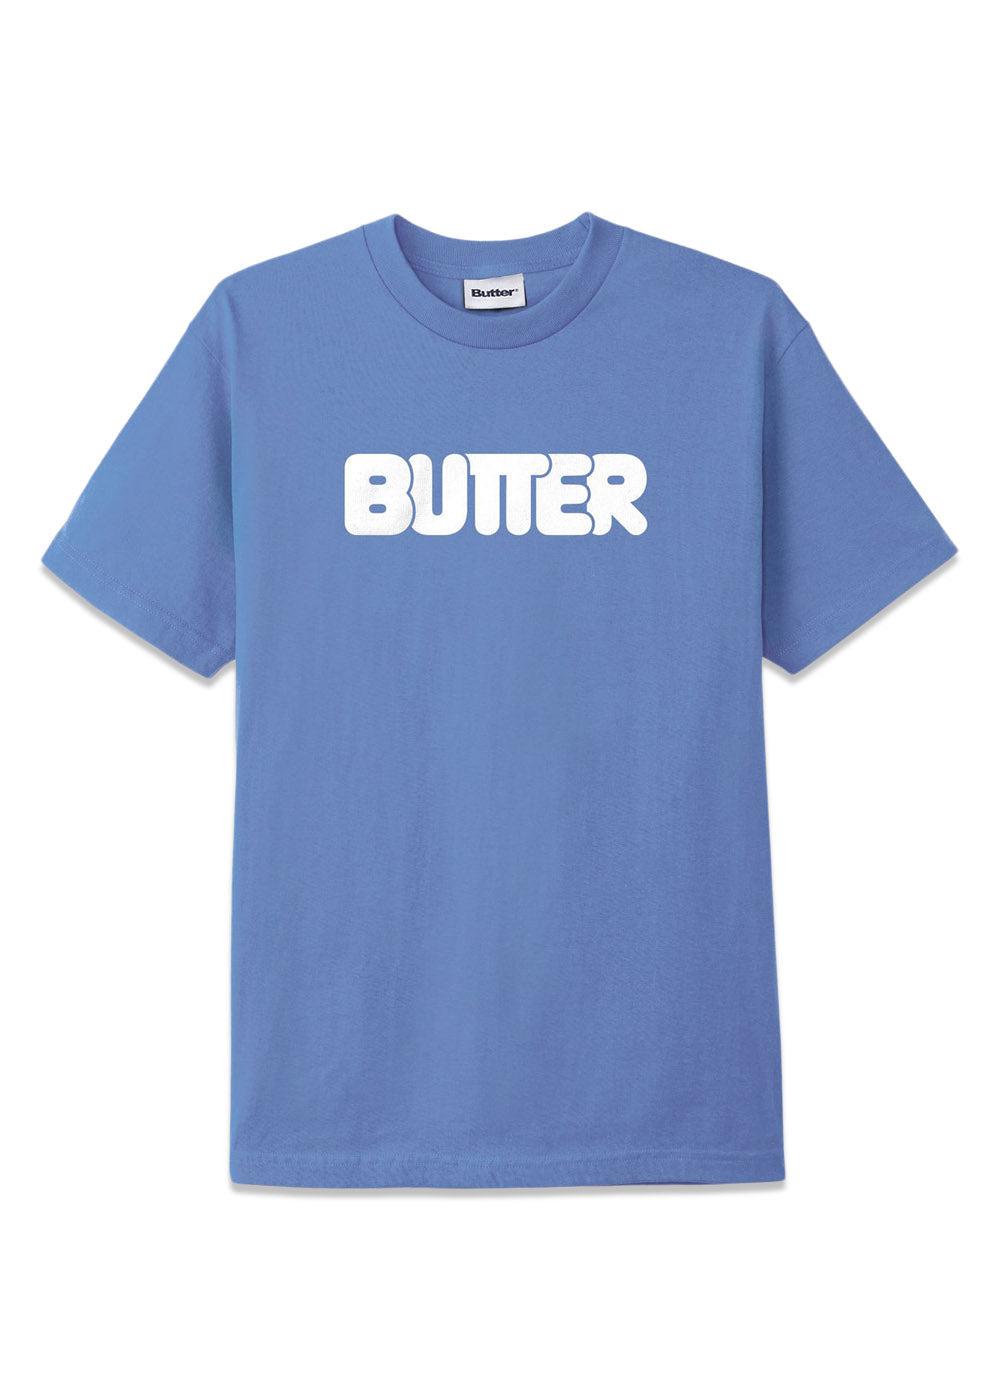 Butter Goods' Rounded Logo Tee - Periwinkle. Køb t-shirts her.